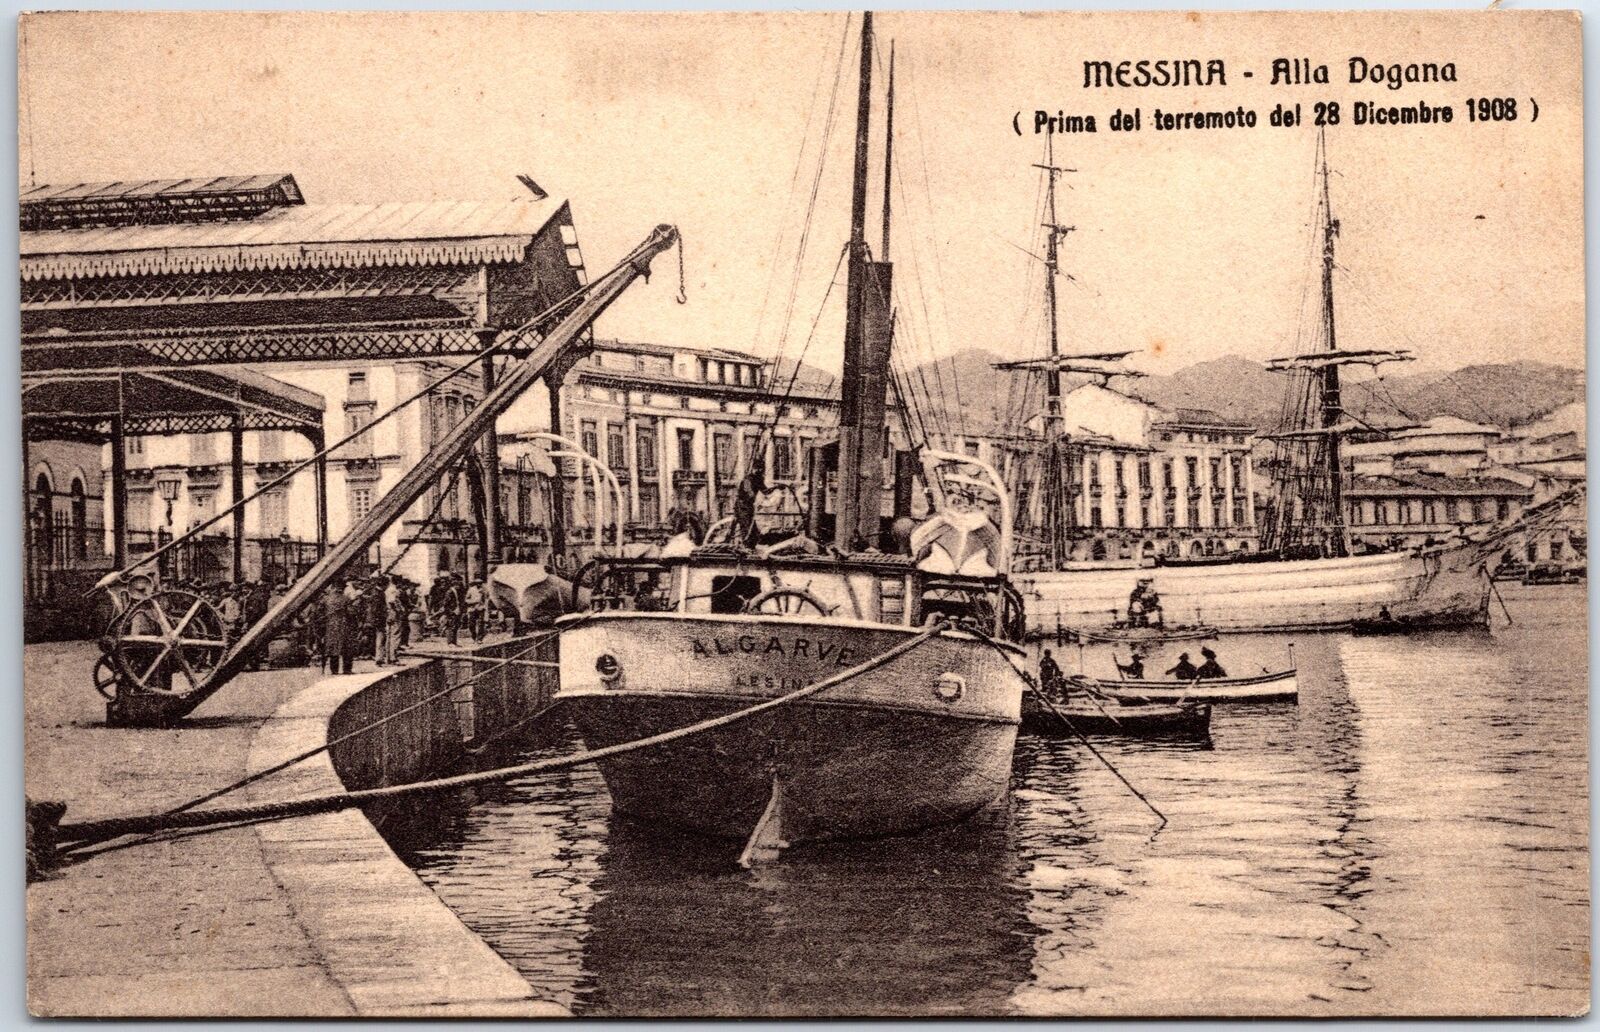 VINTAGE POSTCARD AT THE CUSTOMS HOUSE IN MESSINA ITALY BEFORE THE 1908 EATHQUAKE